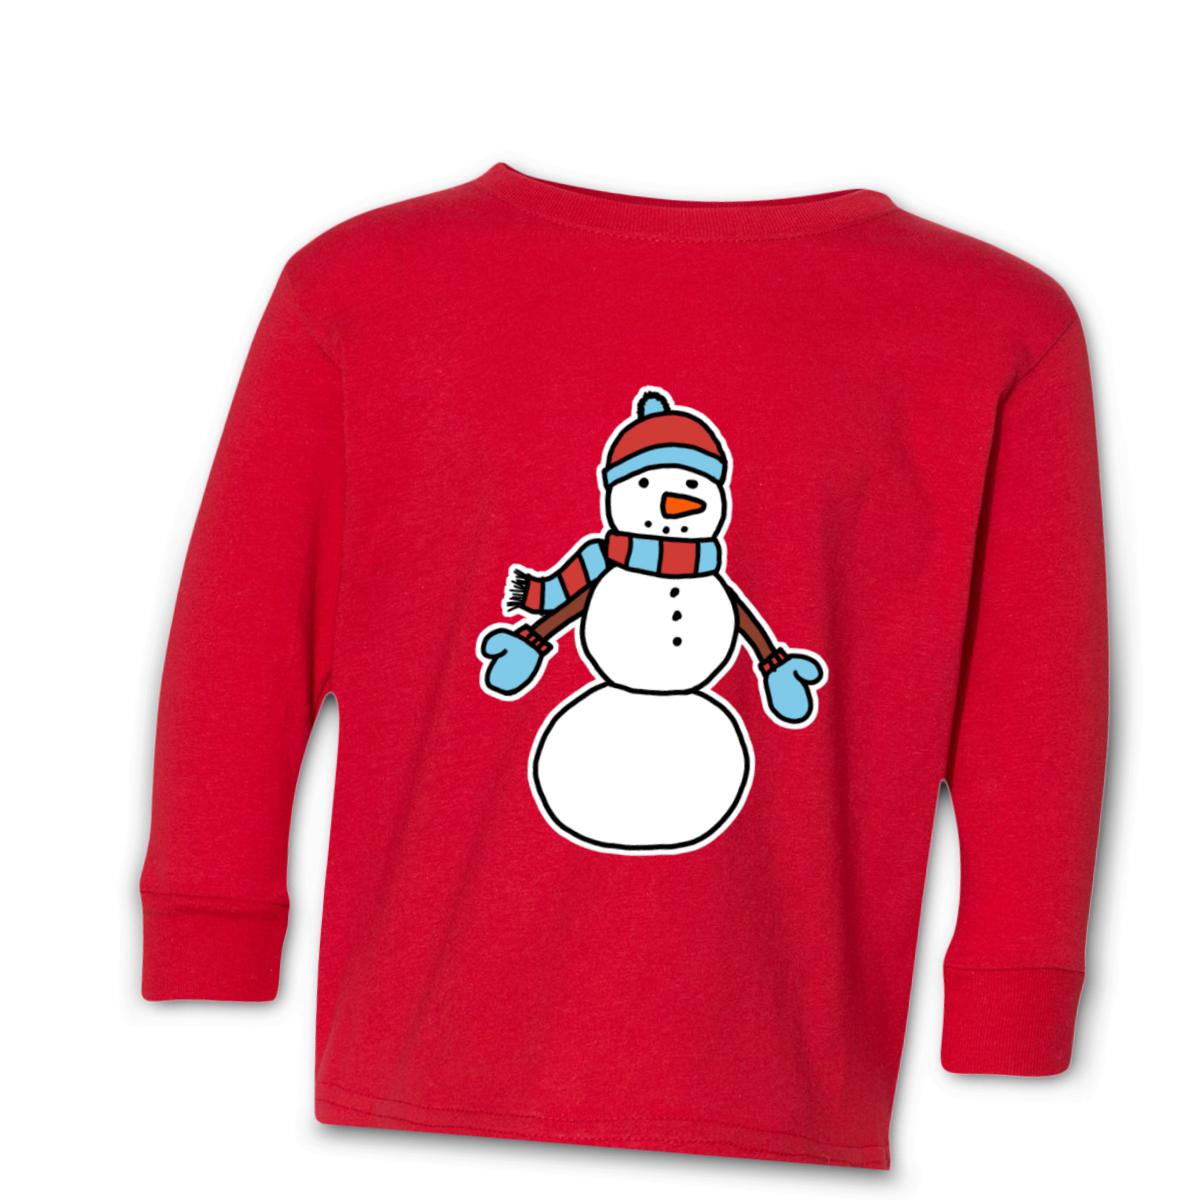 Snowman Bundled Up Toddler Long Sleeve Tee 2T red